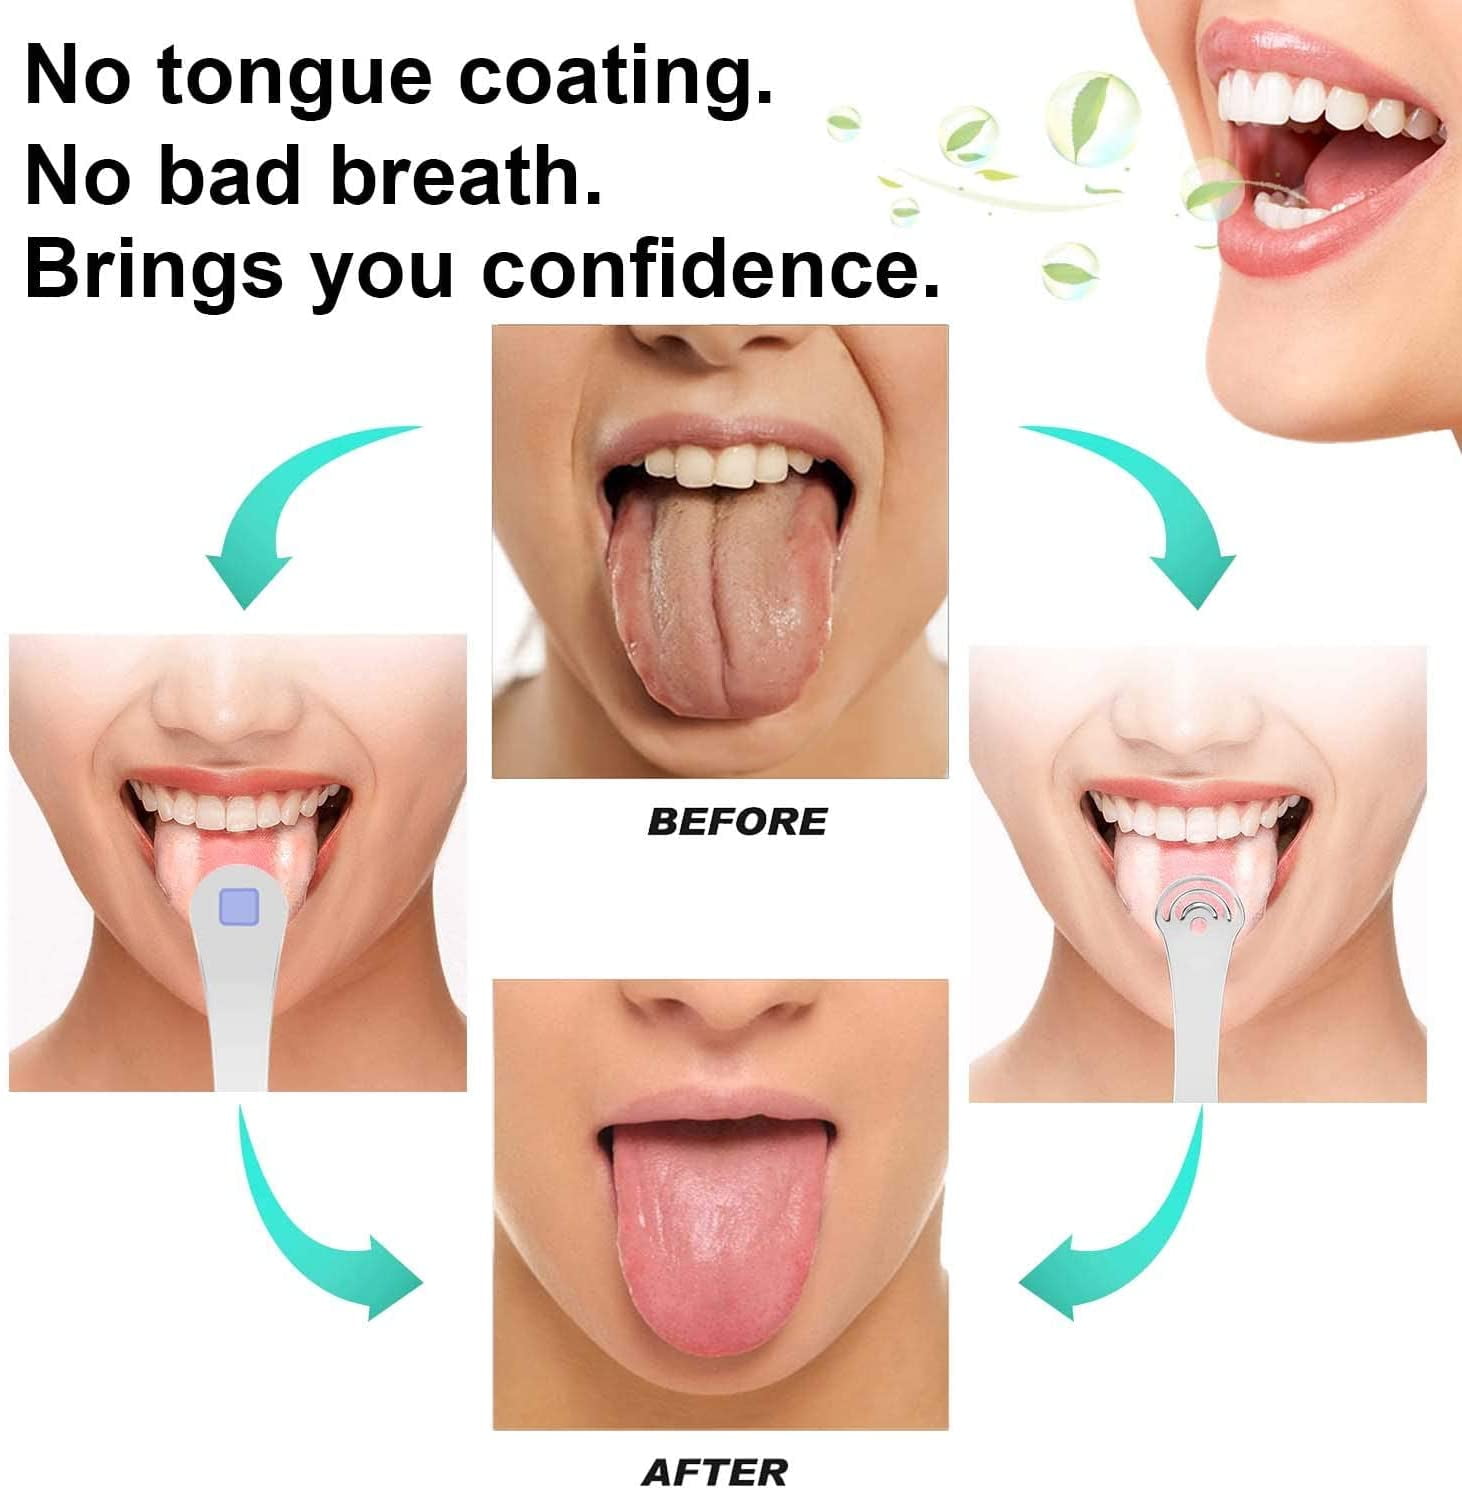  MOOSEC Tongue Scraper for Adults&Kids, Durable Food Grade 2 in  1 Silicone Tongue Brush and 100% Stainless Steel Tongue Scrapers, Reduce  Bad Breath : Health & Household